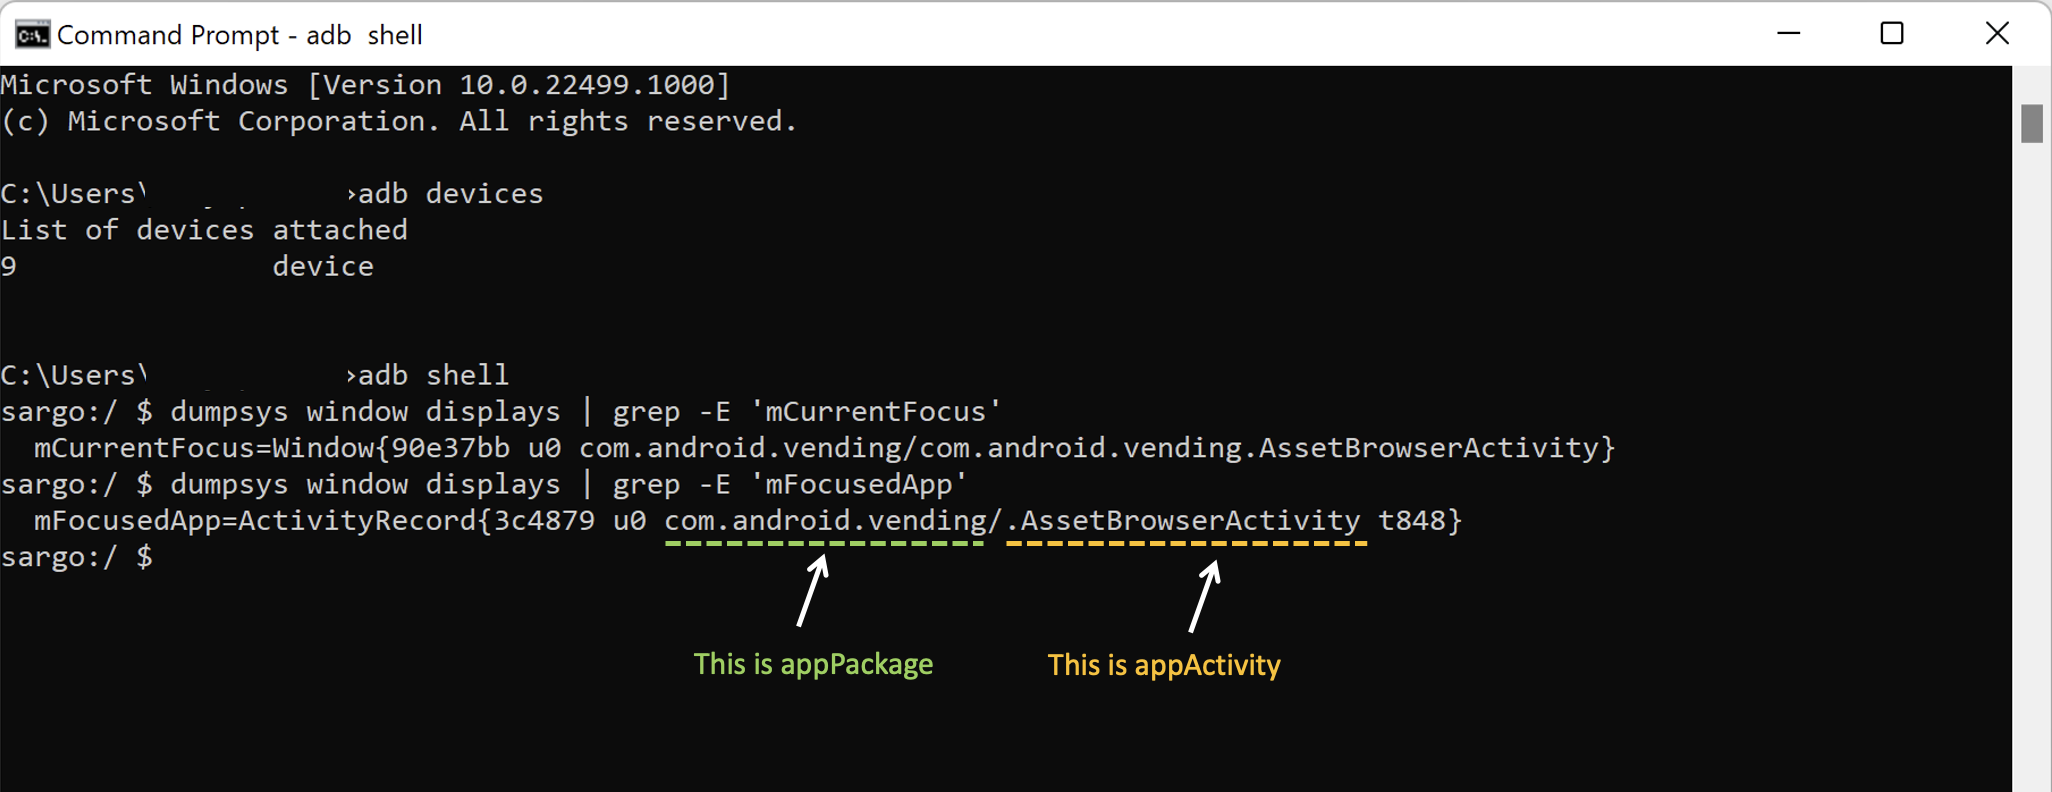 using command mFocusedApp to find appPackage and appActivity